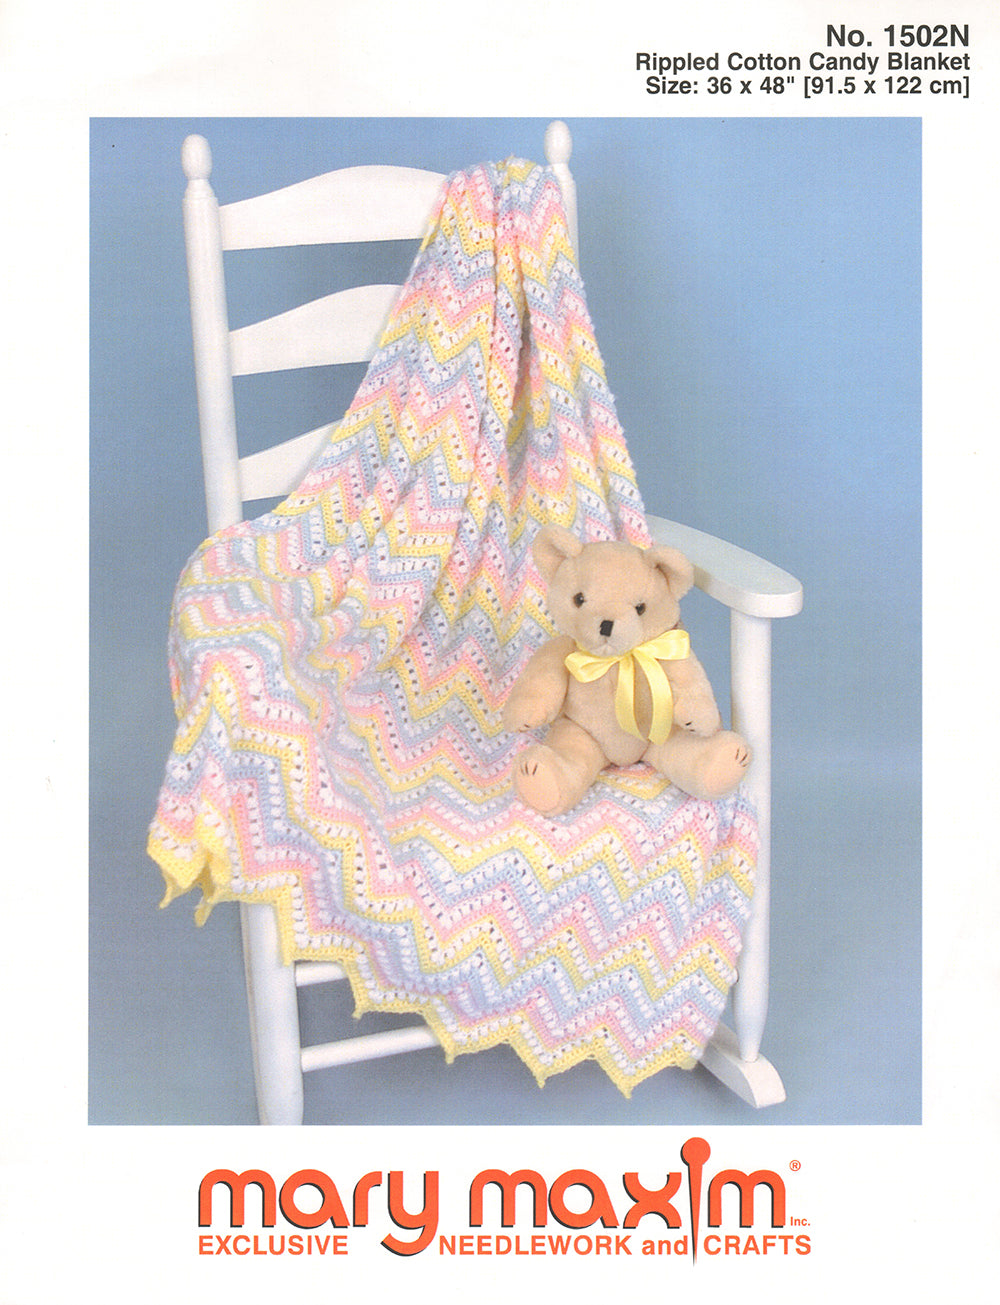 Rippled Cotton Candy Blanket Pattern